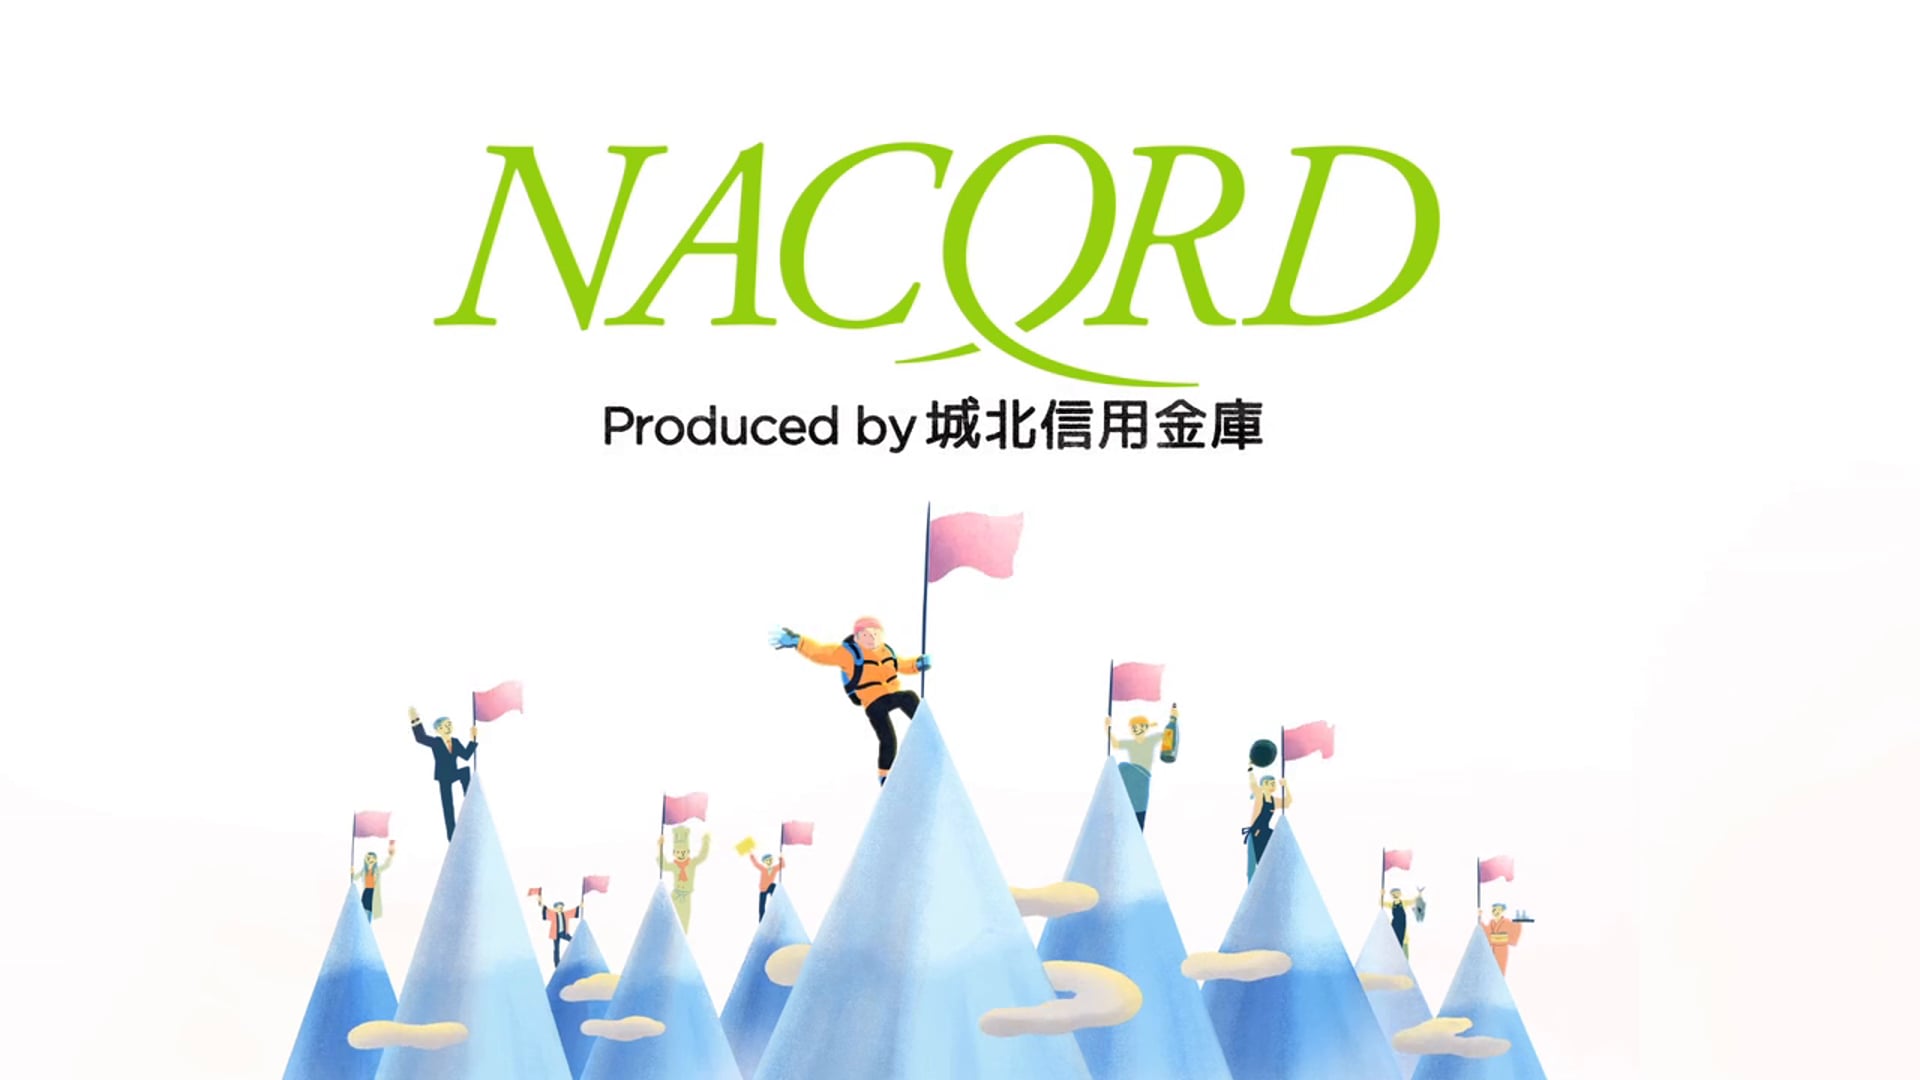 Nacord - Web Commercial